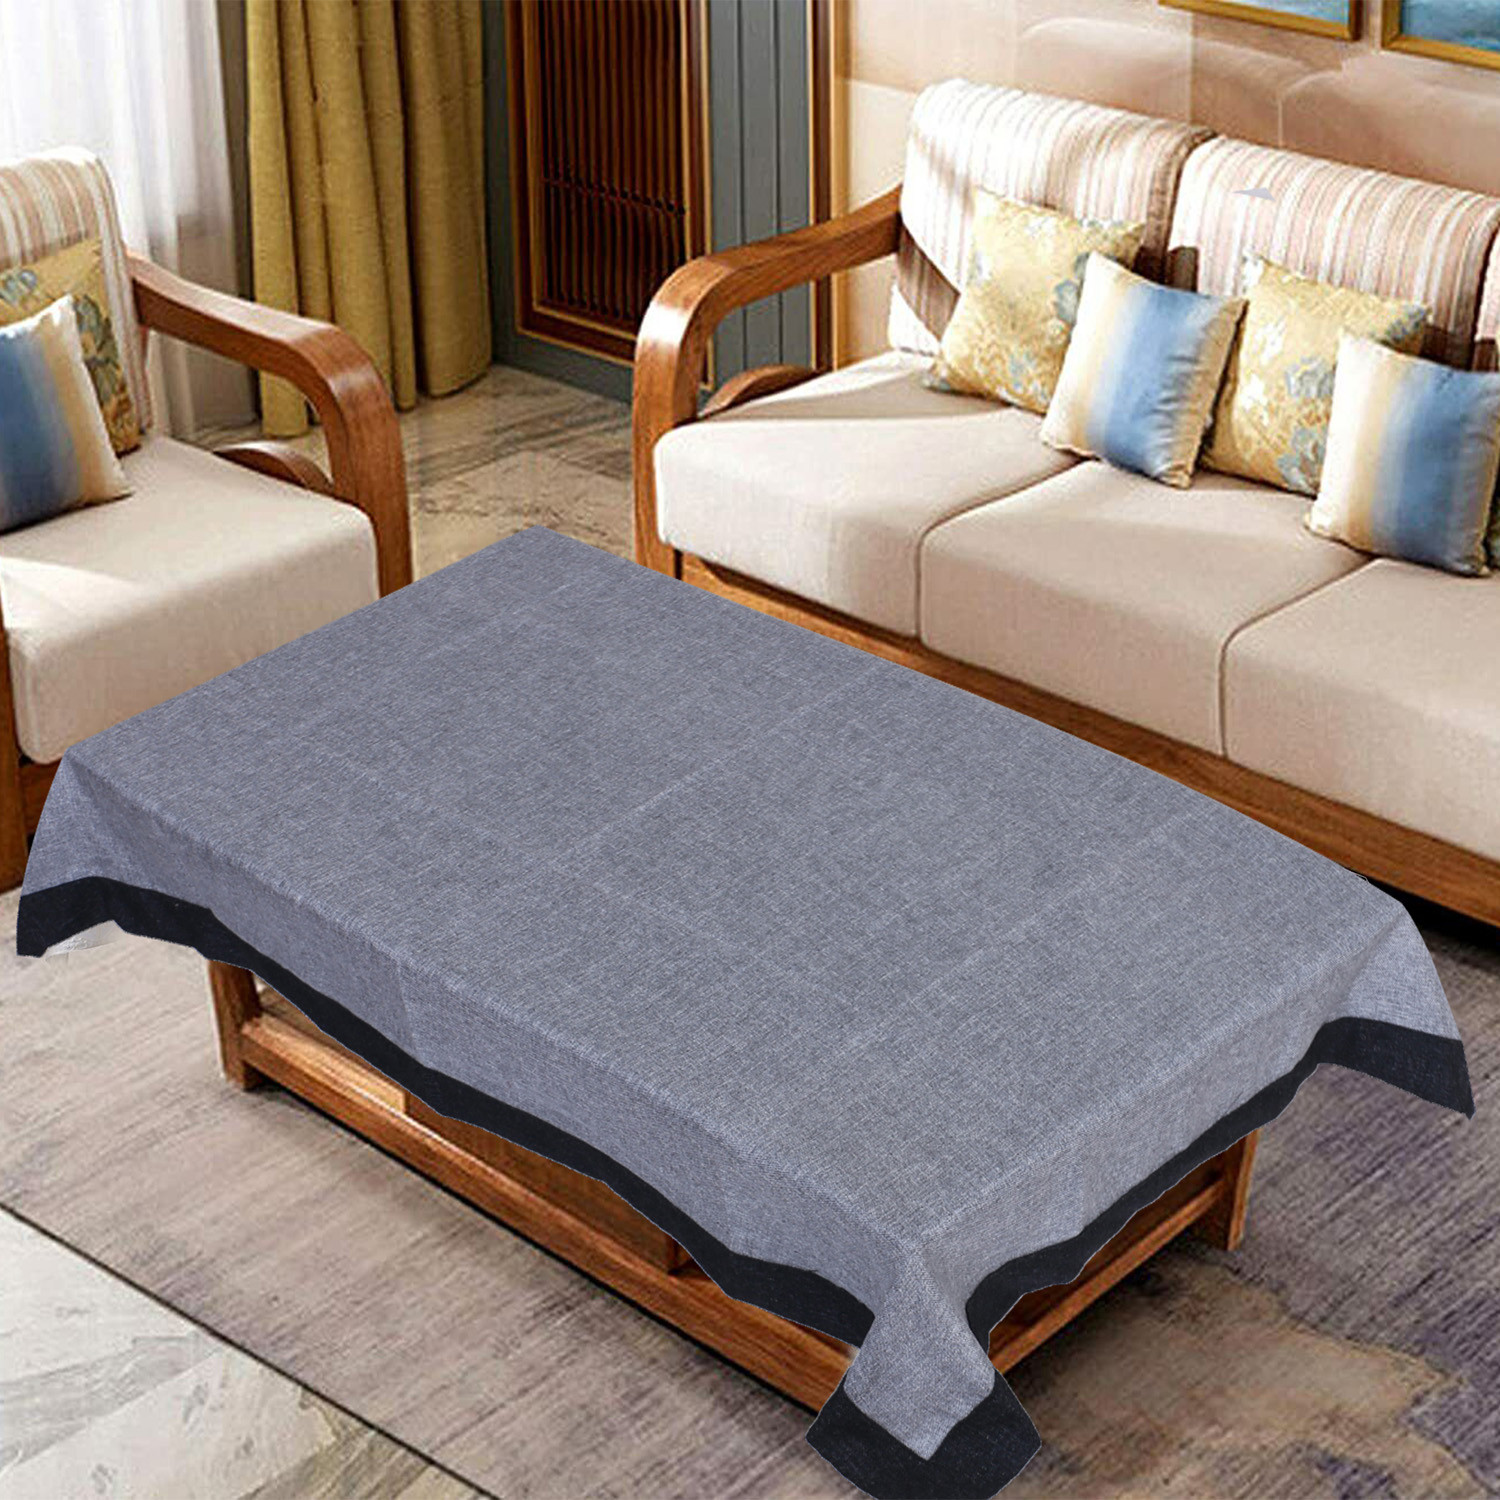 Kuber Industries Center Table Cover|Luxurious Jute Tablecloth|Slip Resistant Protector Table Top Cover With Jutelace Border, 40x60 Inch (Gray)